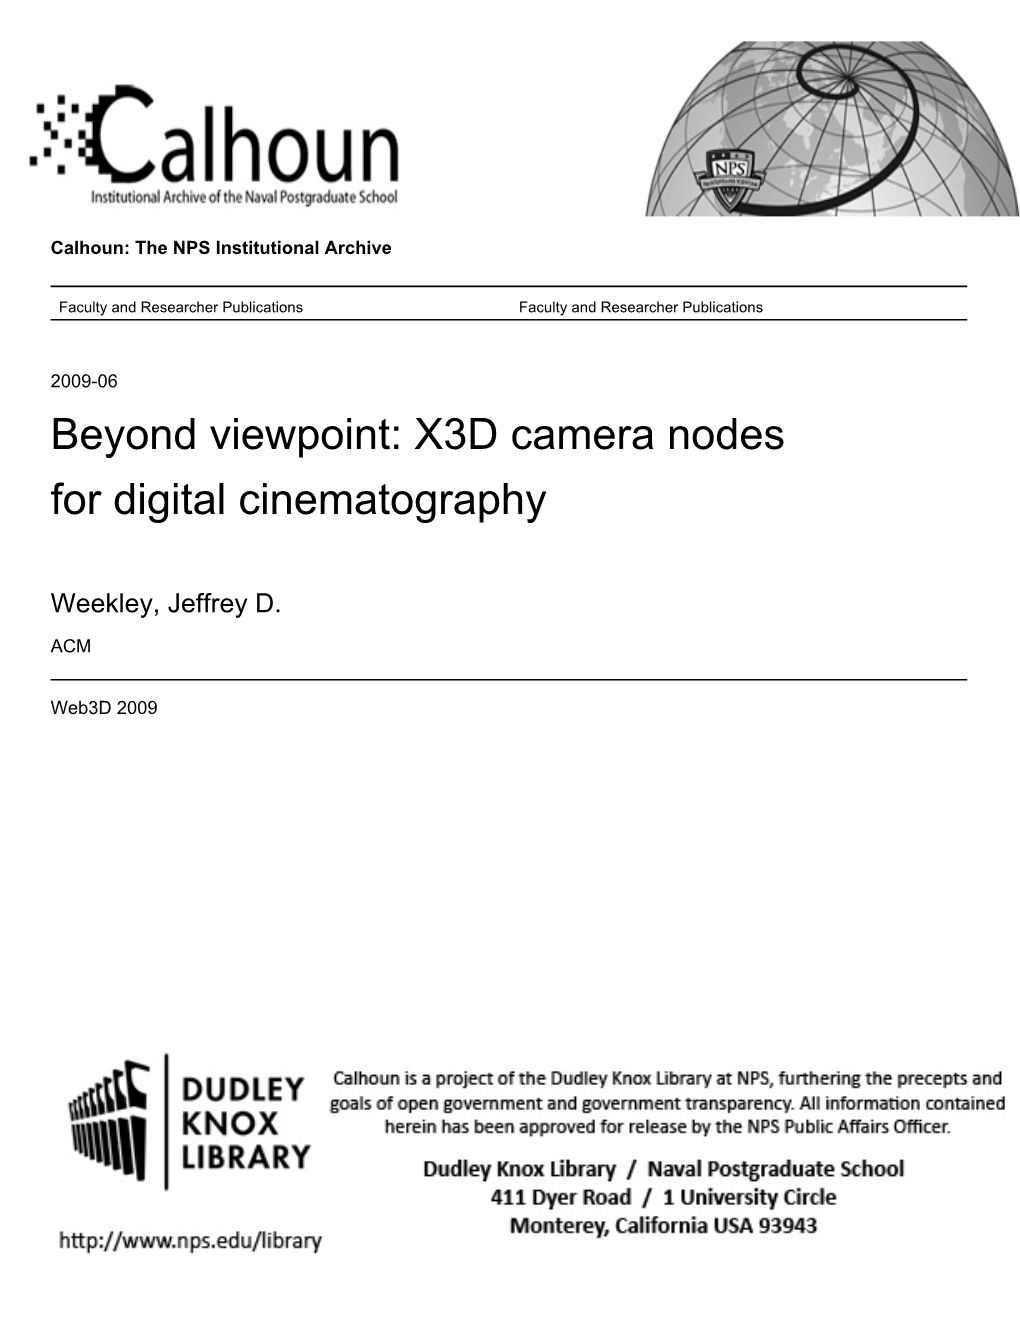 Beyond Viewpoint: X3D Camera Nodes for Digital Cinematography